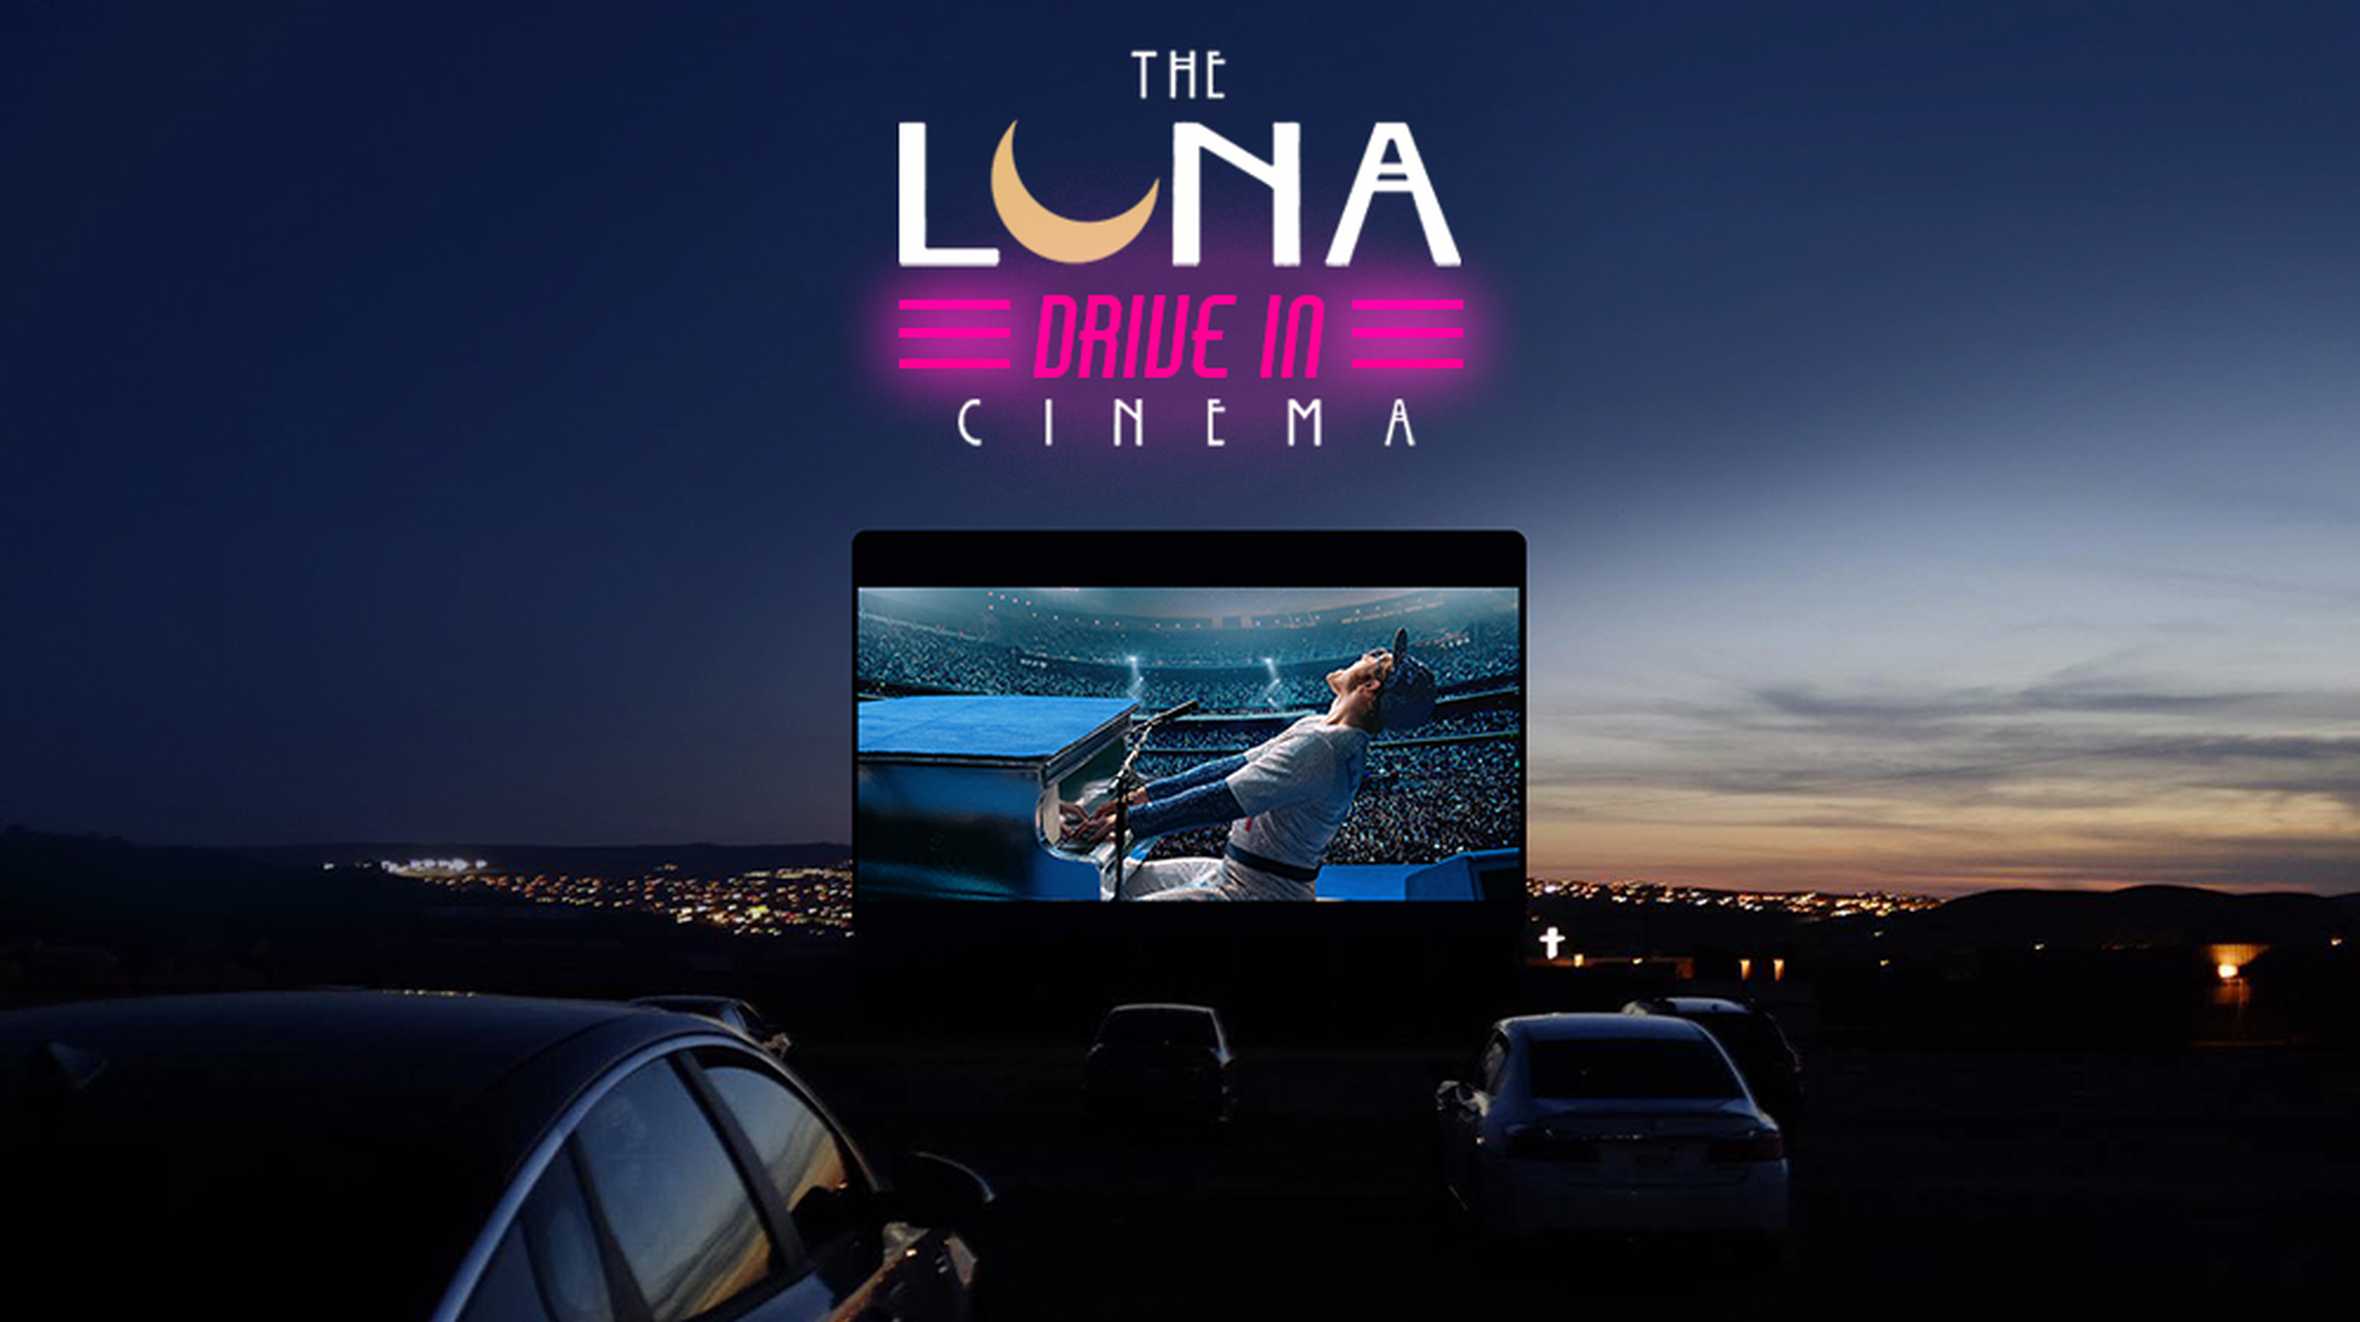 Cars in front of a drive-in movie screen at sunset, with the Luna Cinema logo in neon lights.